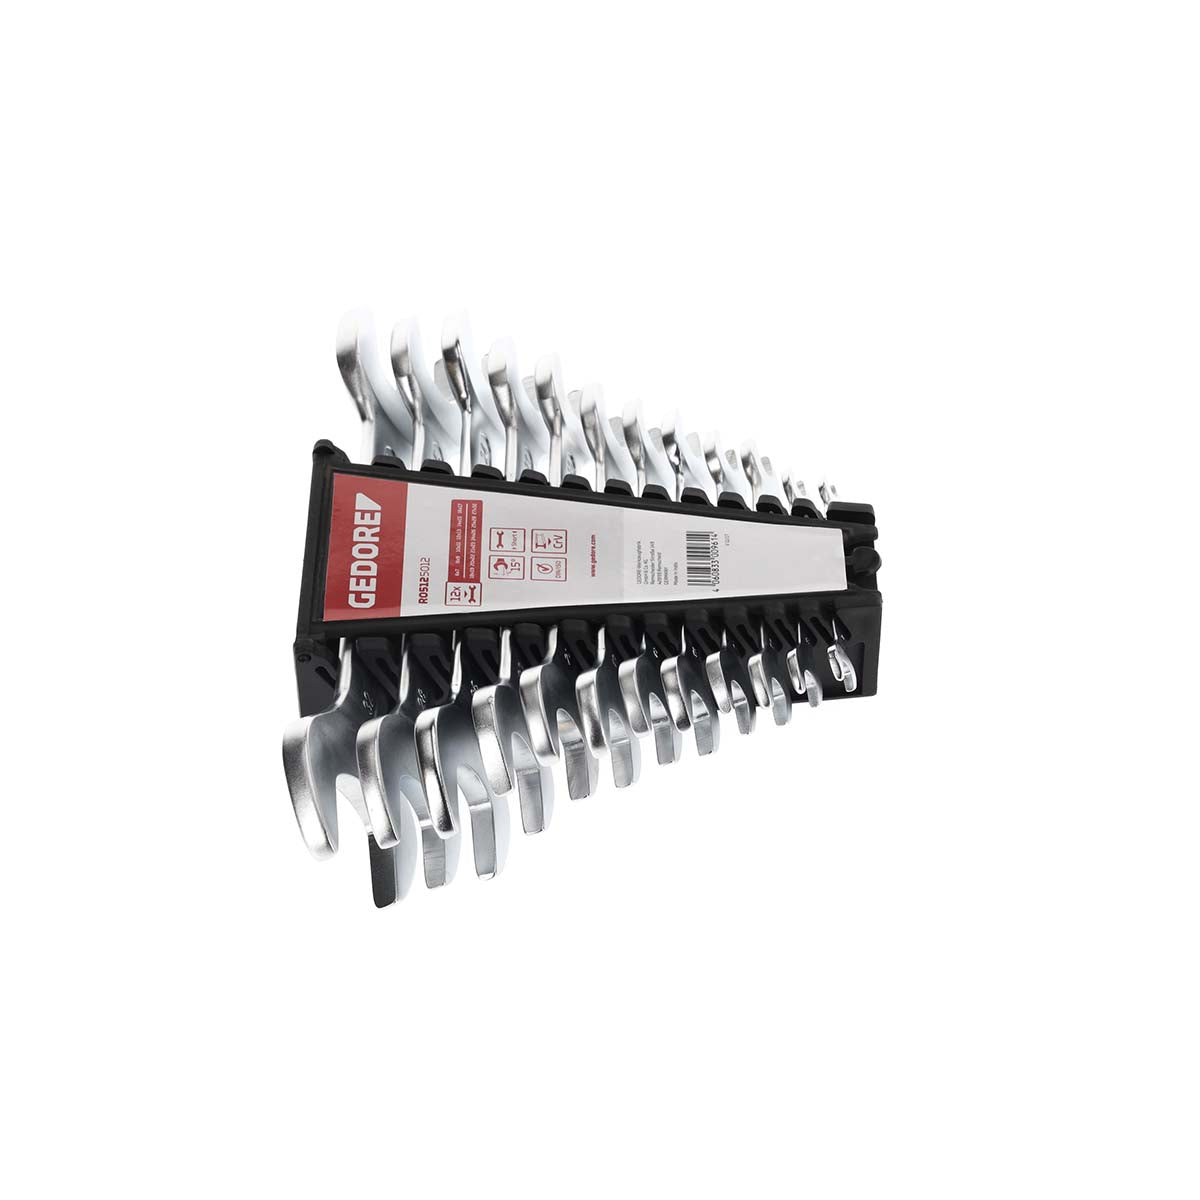 GEDORE red R05125012 – Set of 12 open-end wrenches, short model, 6-32 mm (3300961)